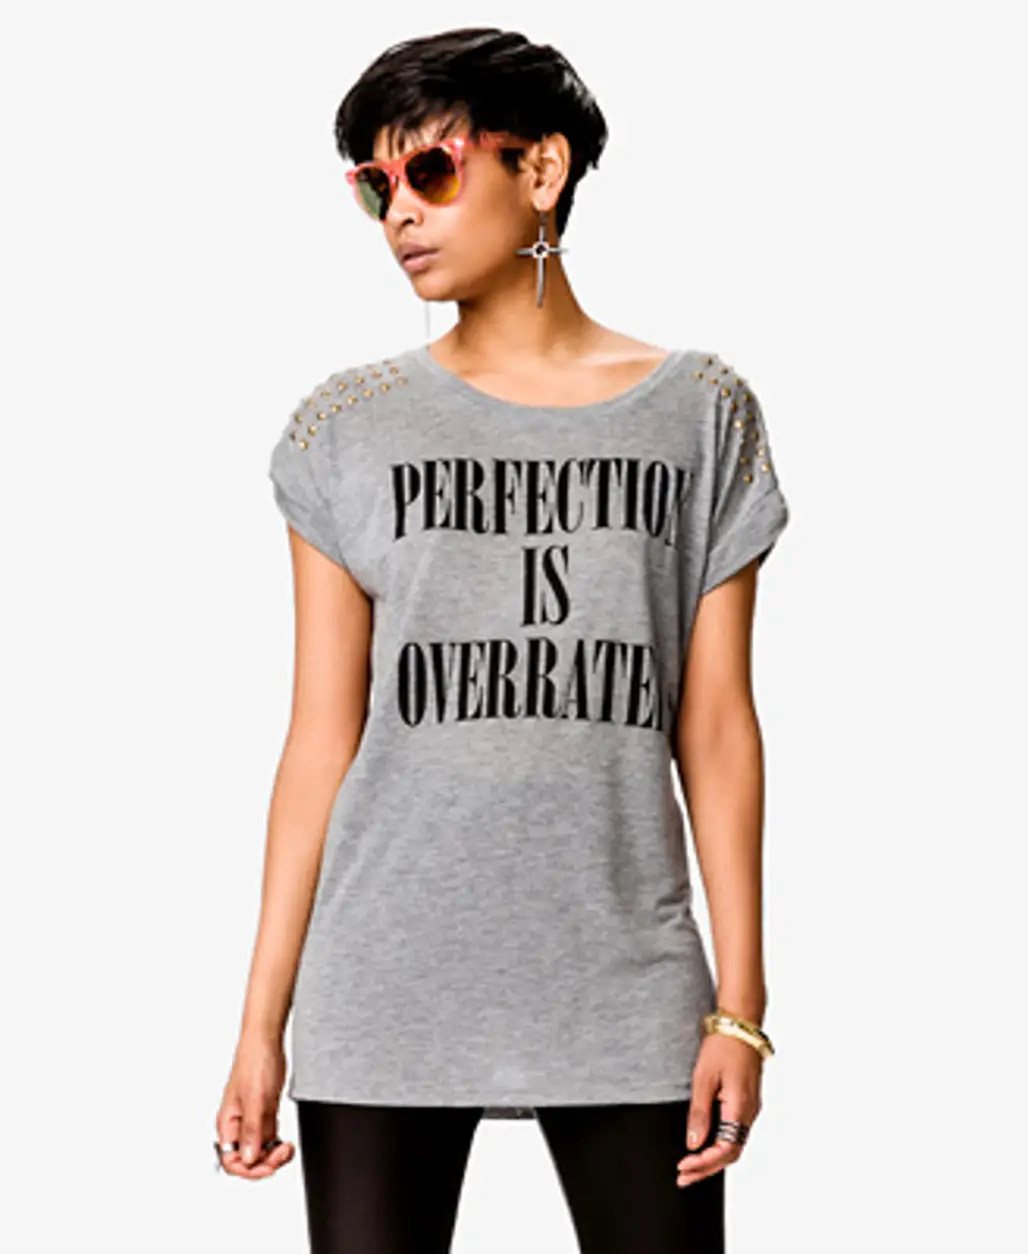 Perfection is Overrated Tee from Forever 21